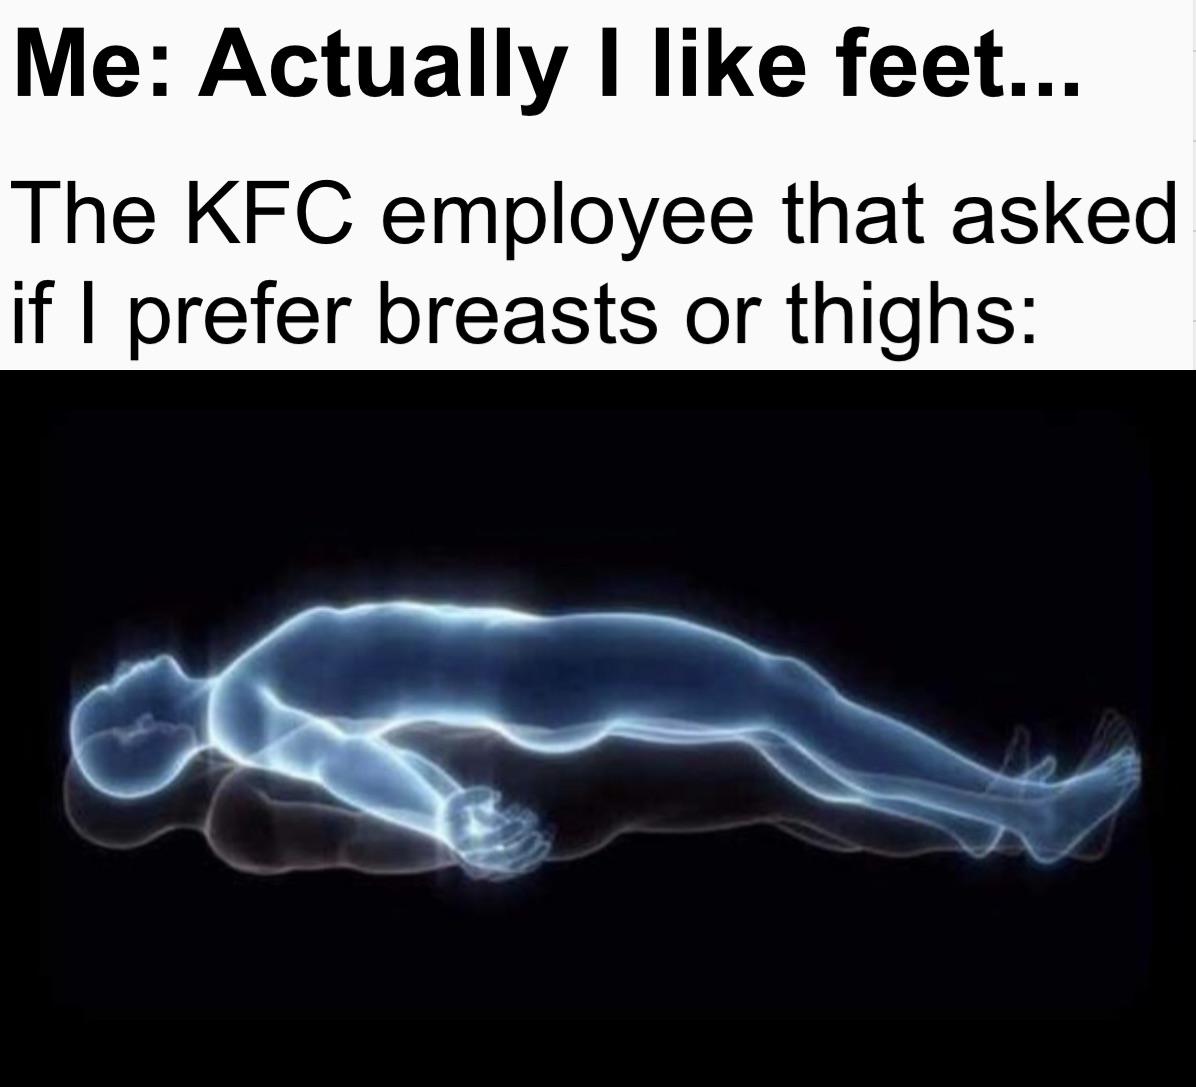 leaving my body meme - Me Actually I feet... The Kfc employee that asked if I prefer breasts or thighs